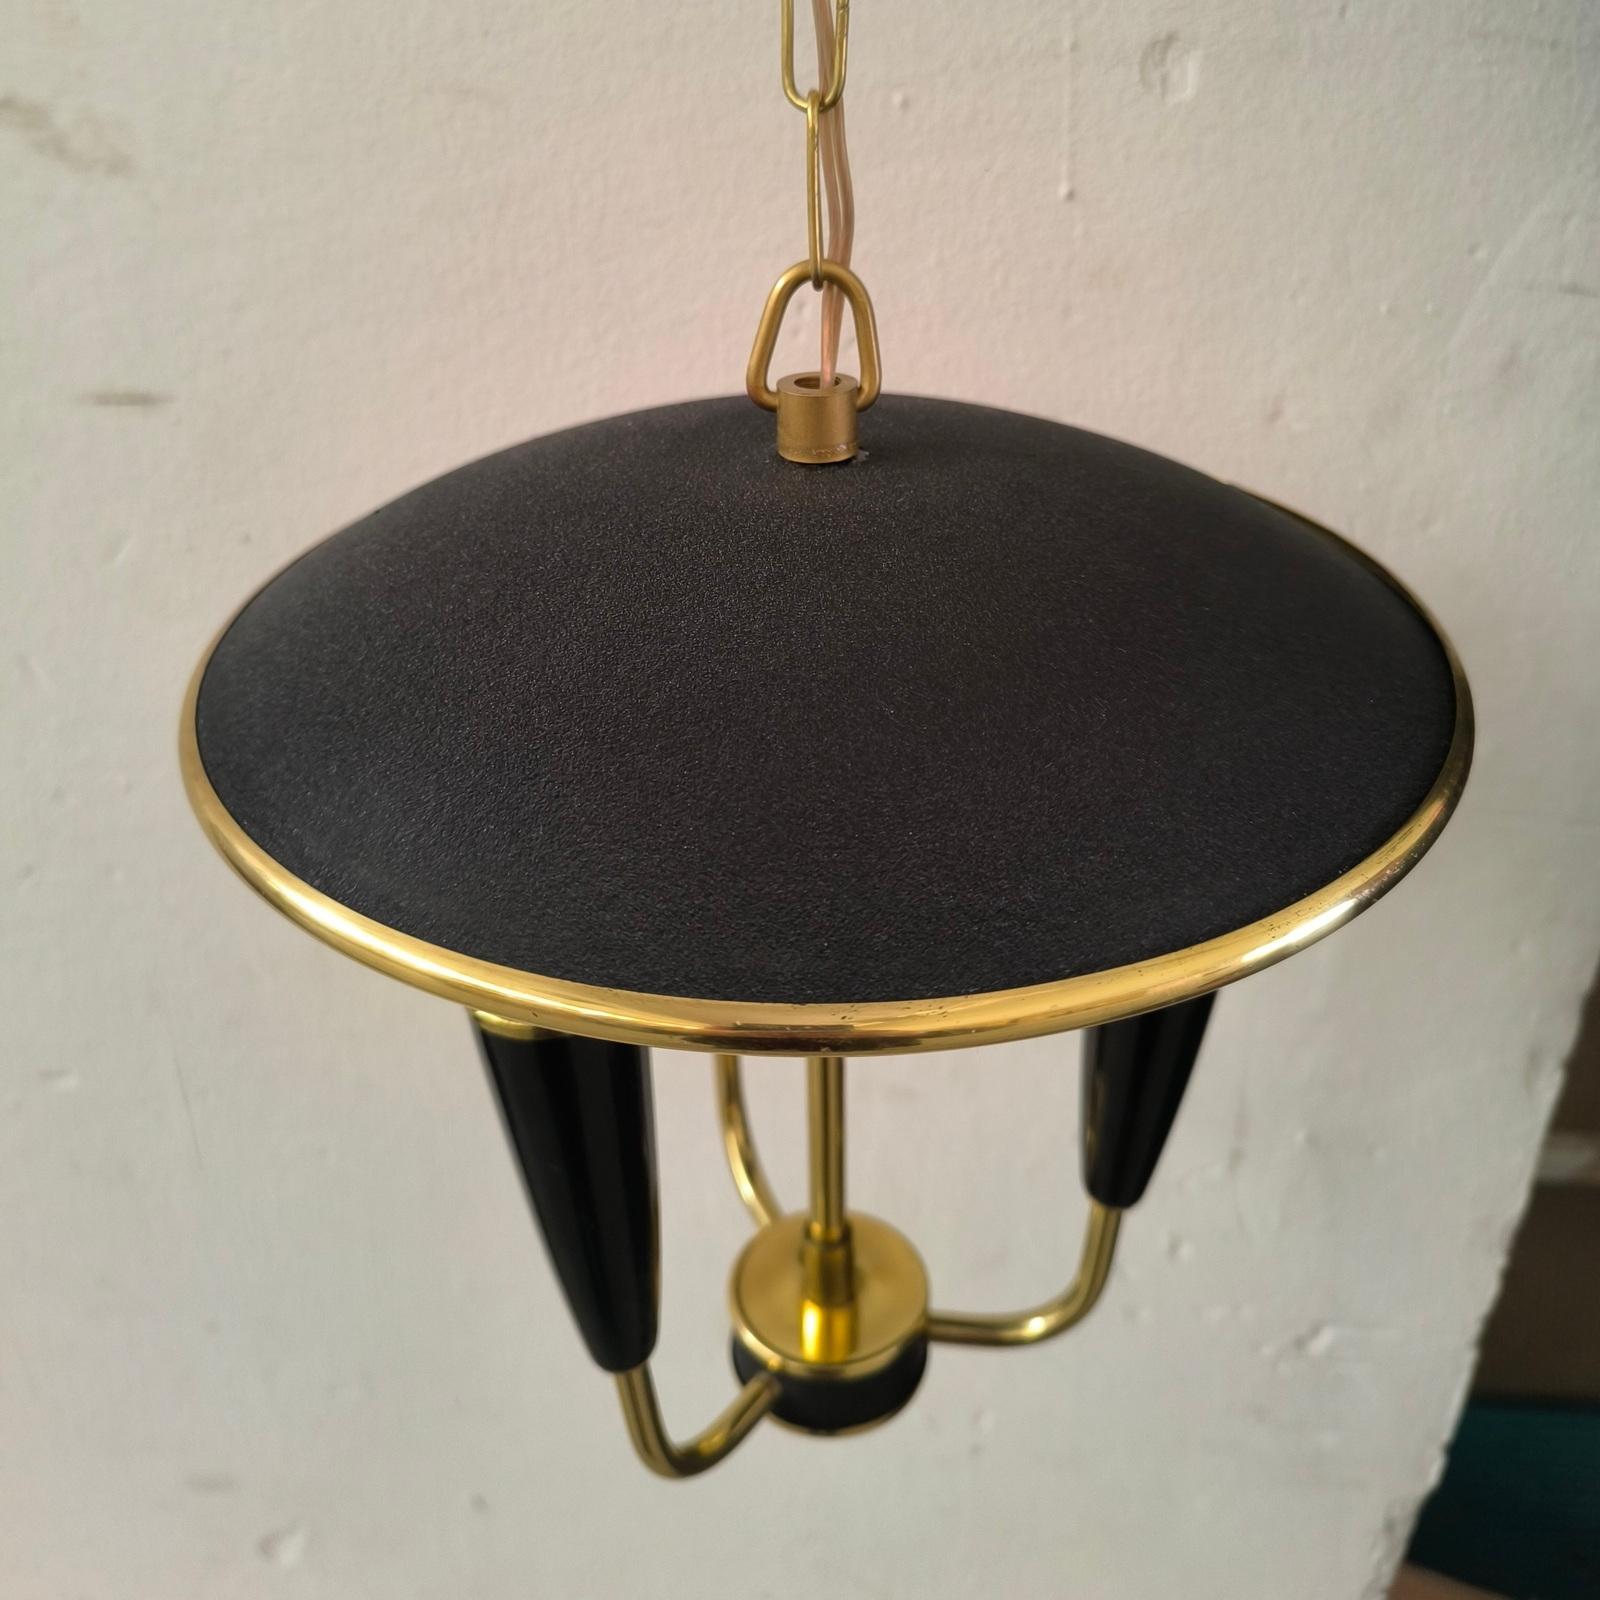 French Mid-Century Modern Ceiling Light Attributed to Maison Lunel, 1940s For Sale 2